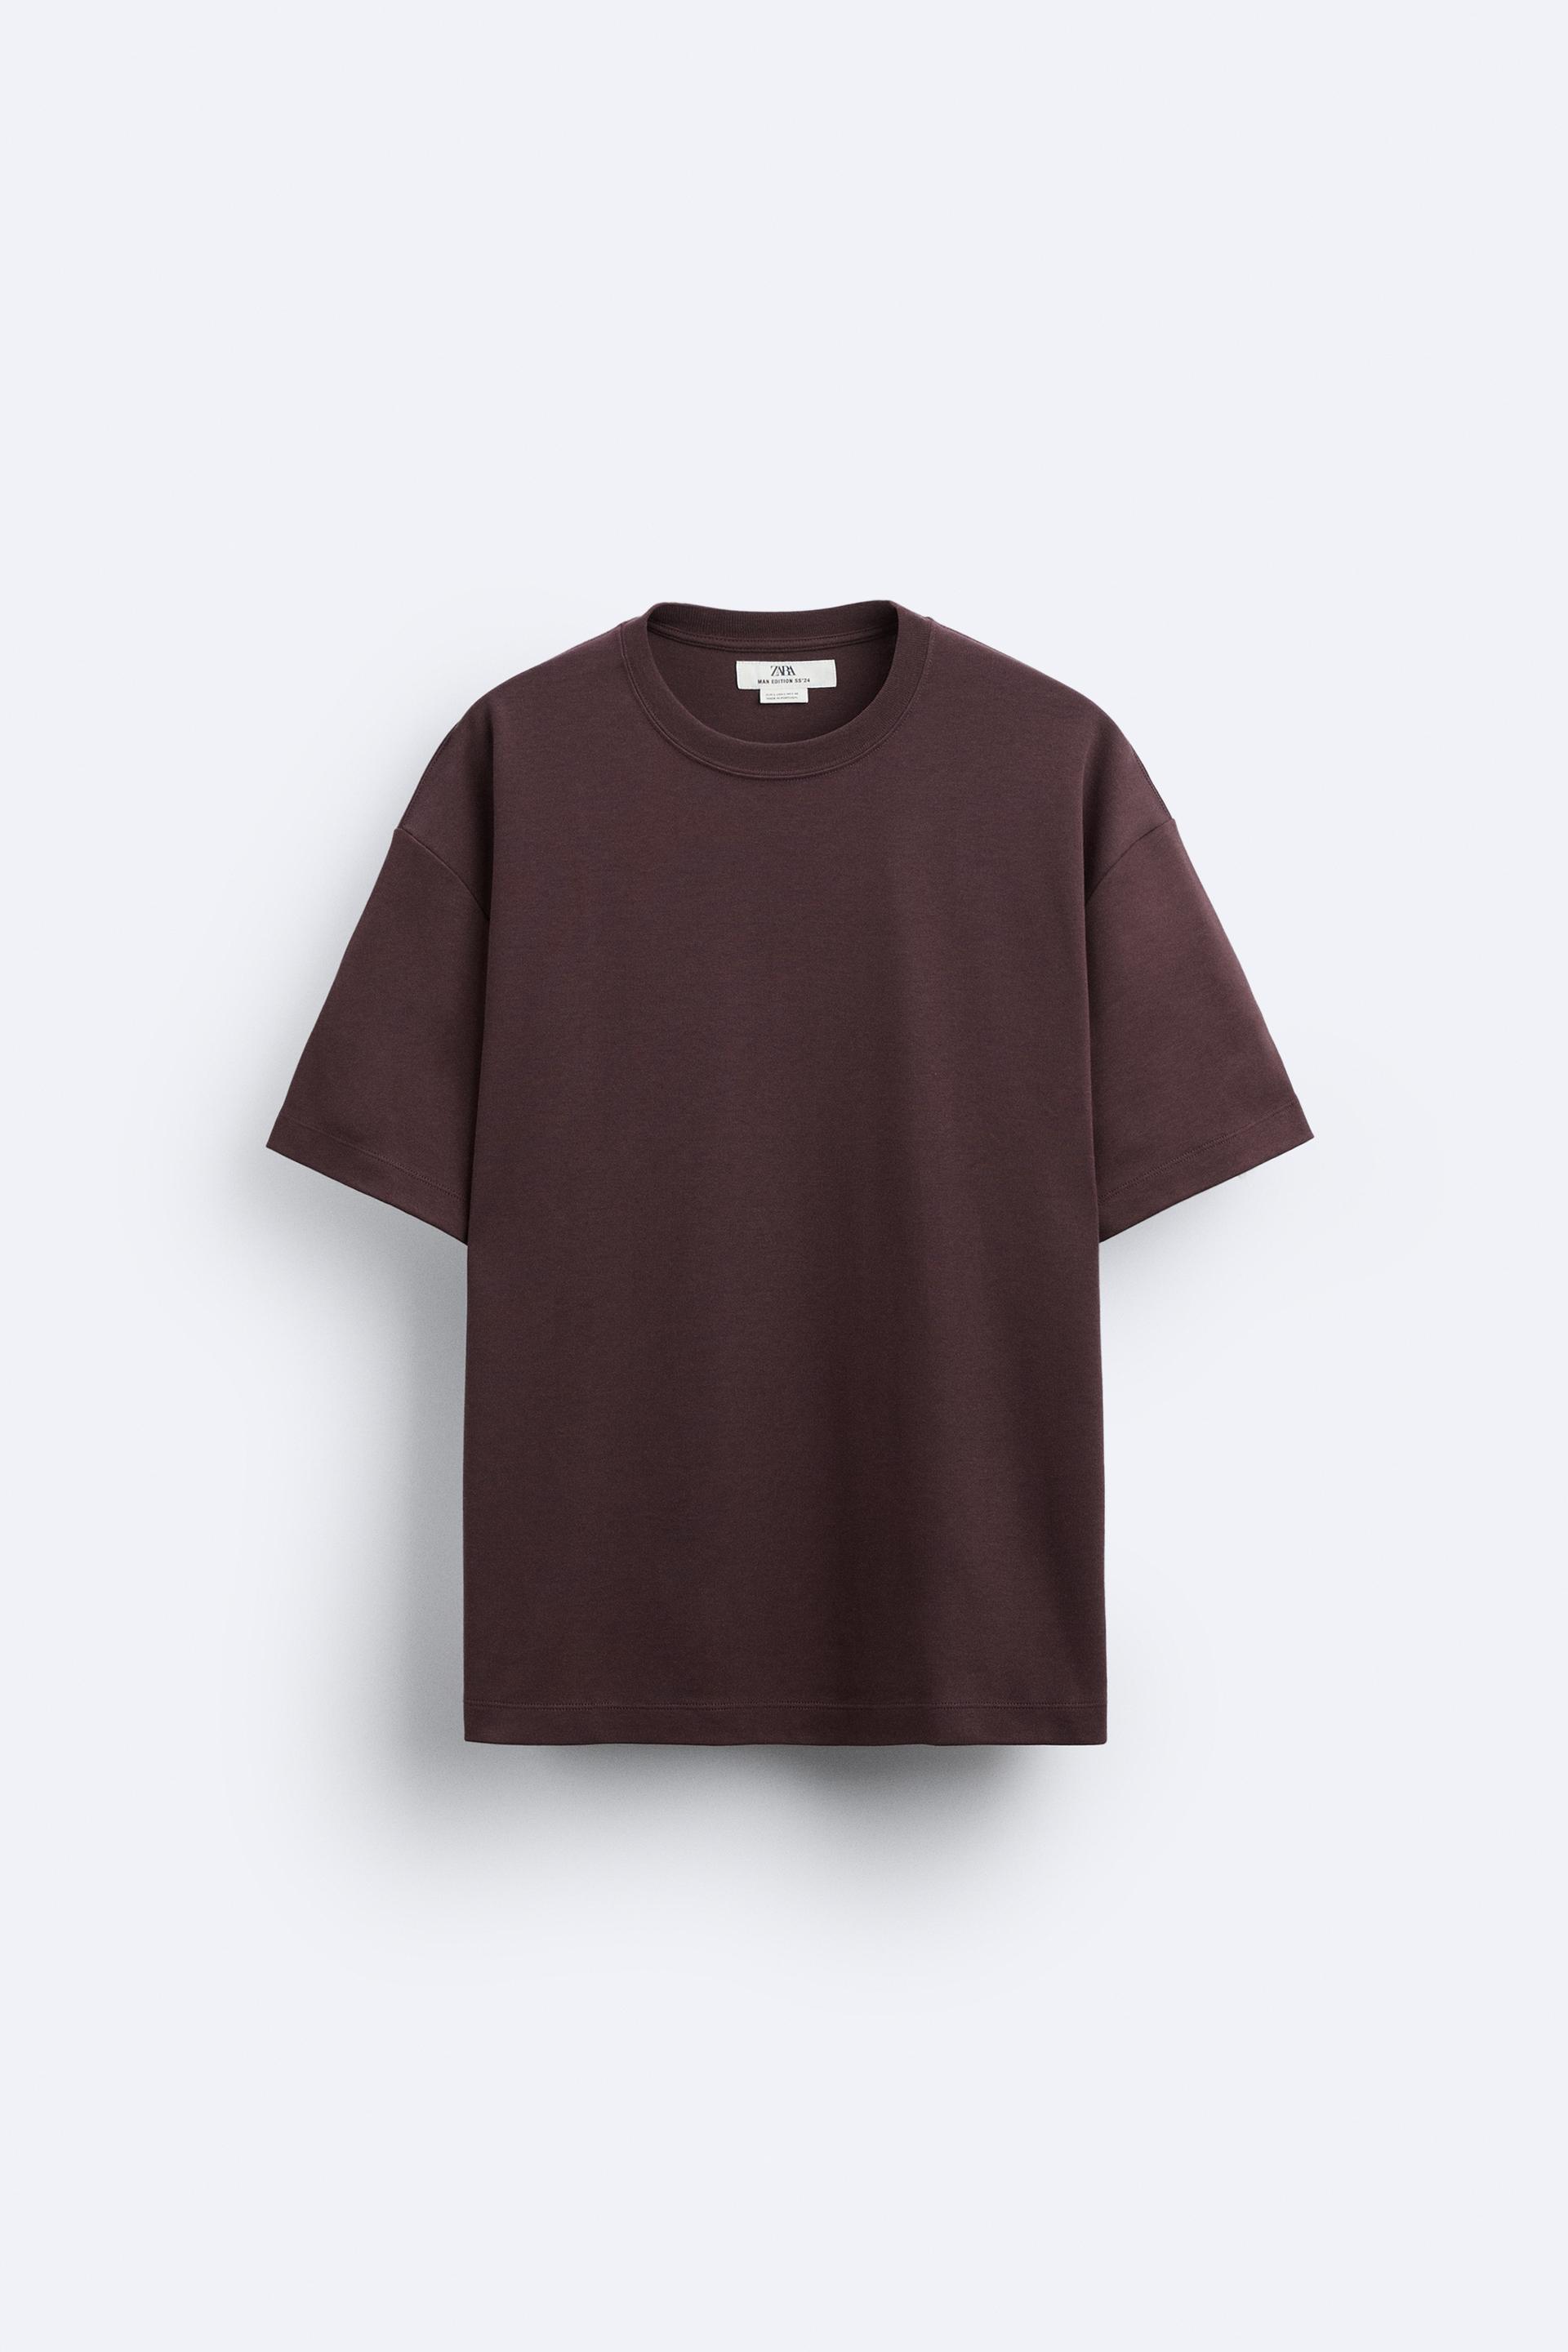 RELAXED FIT T-SHIRT - Anthracite grey